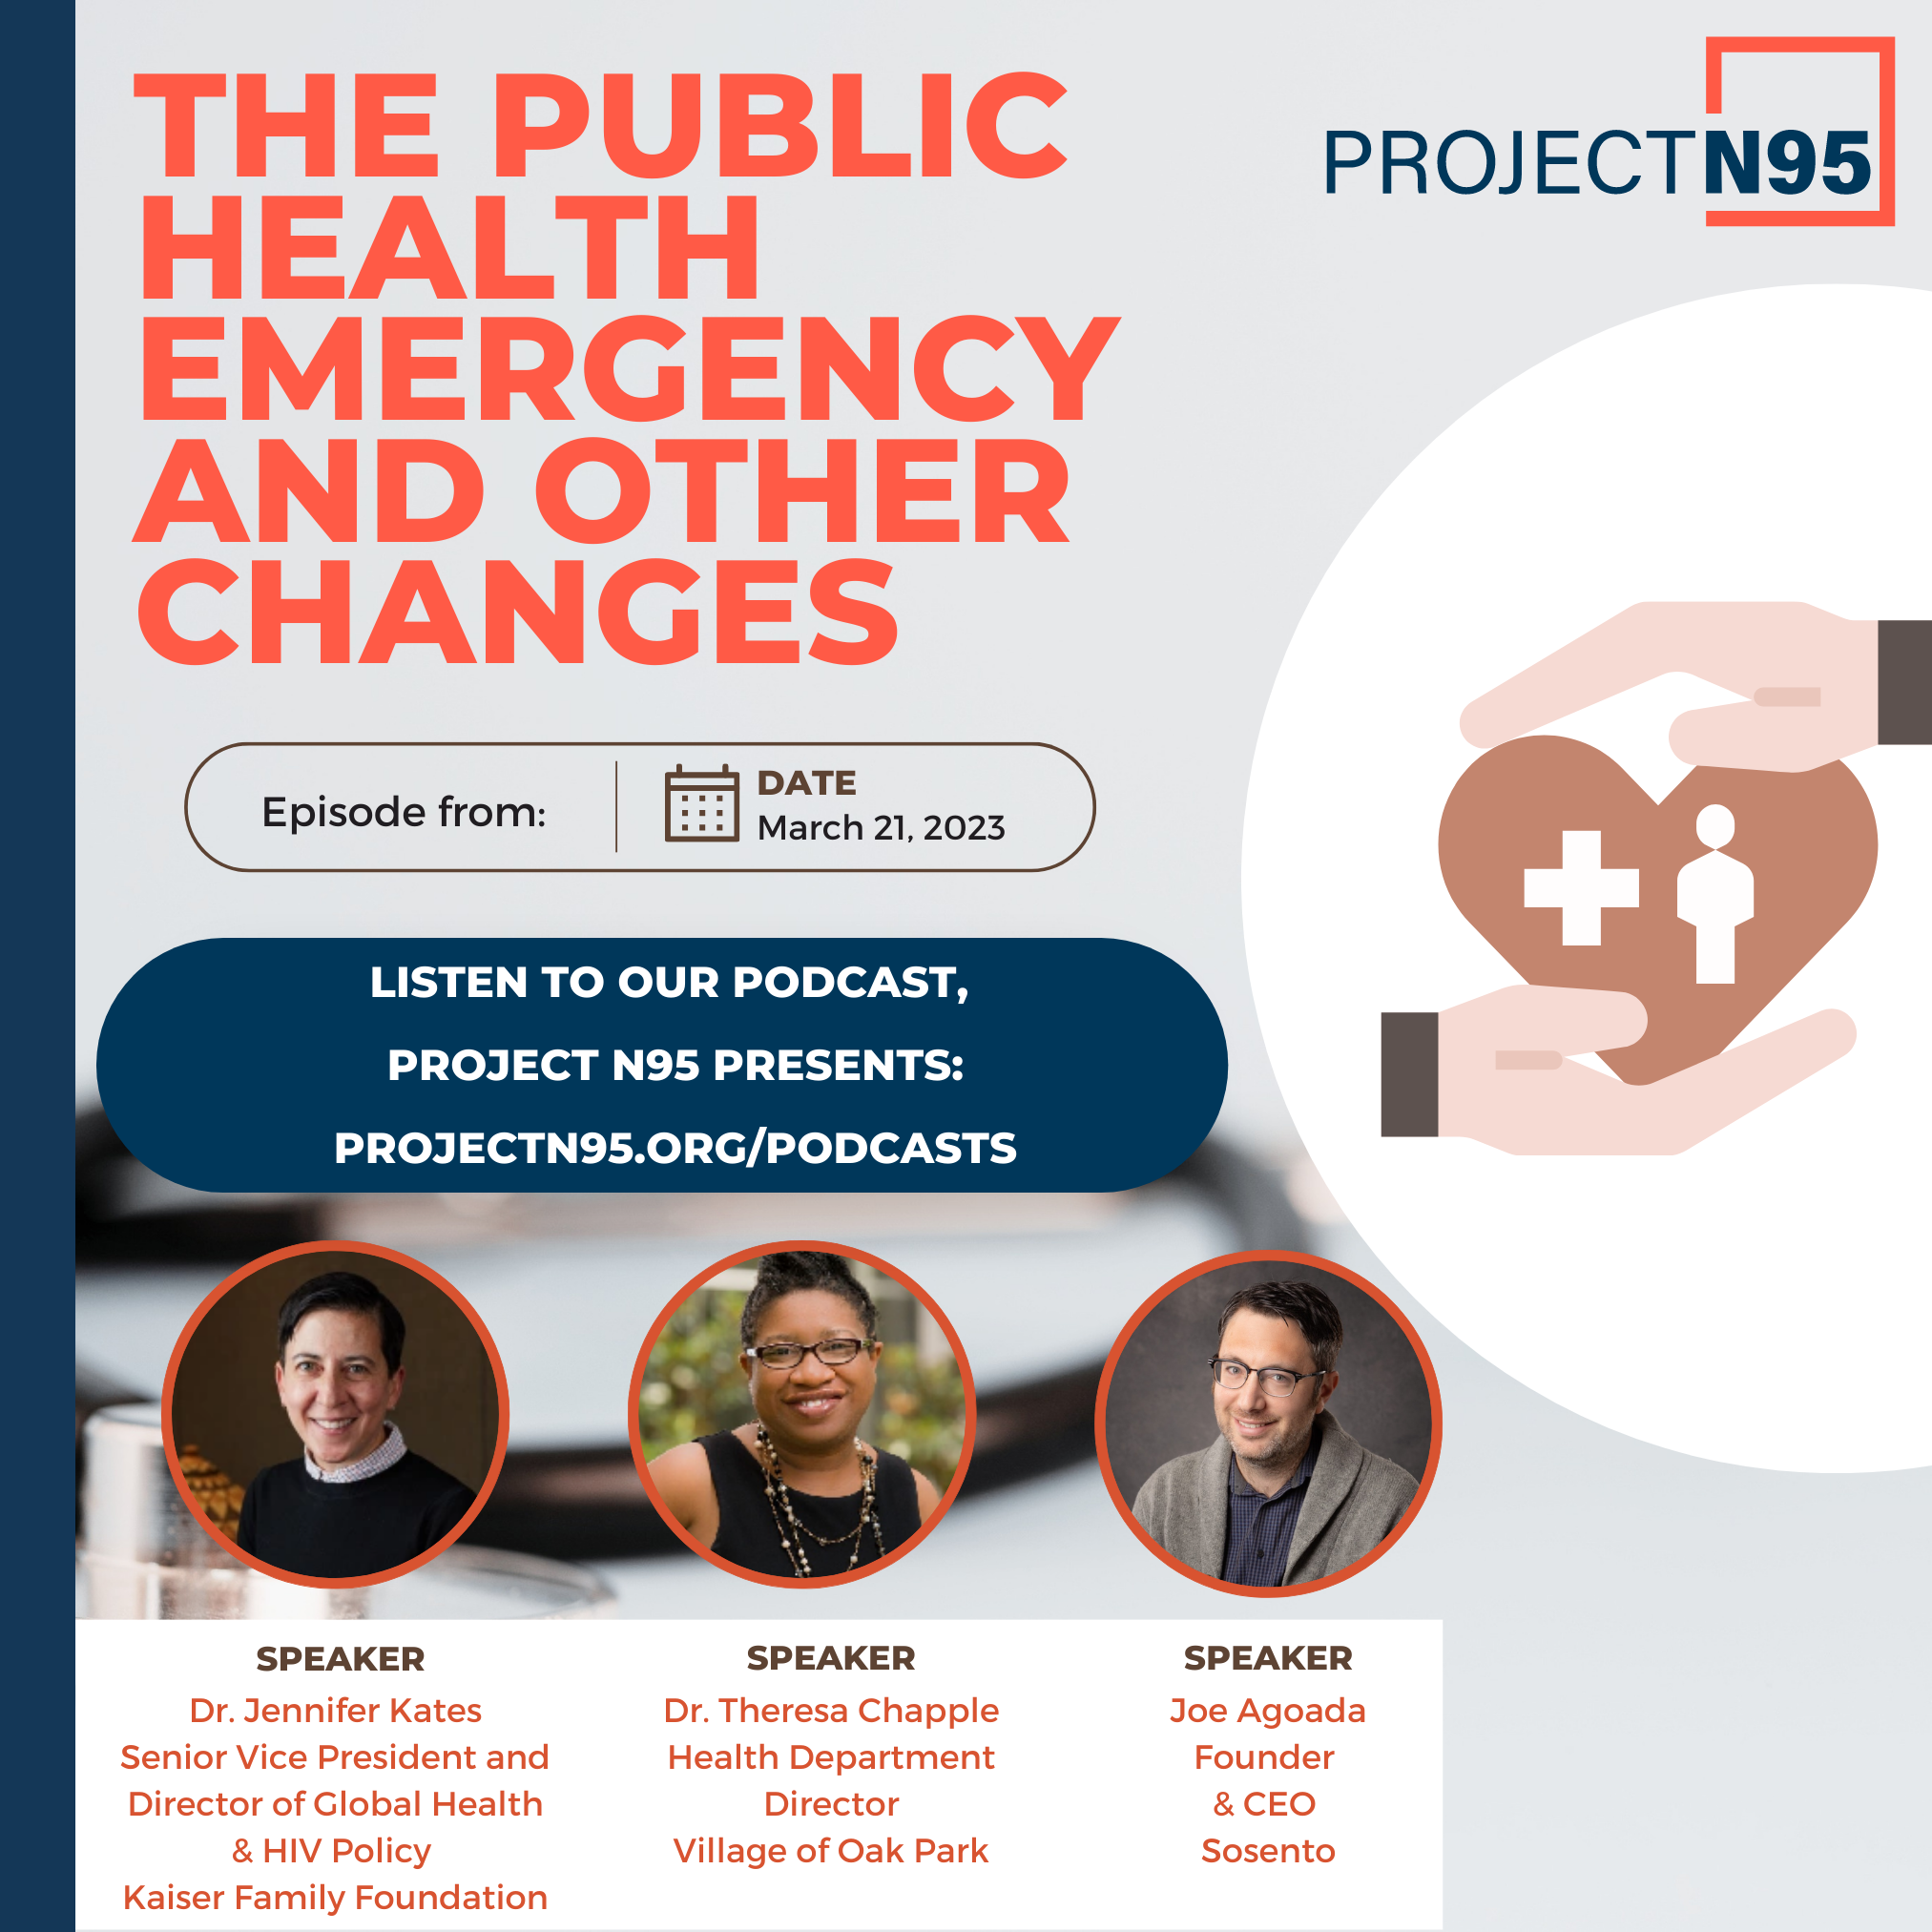 The Public Health Emergency And Other Changes